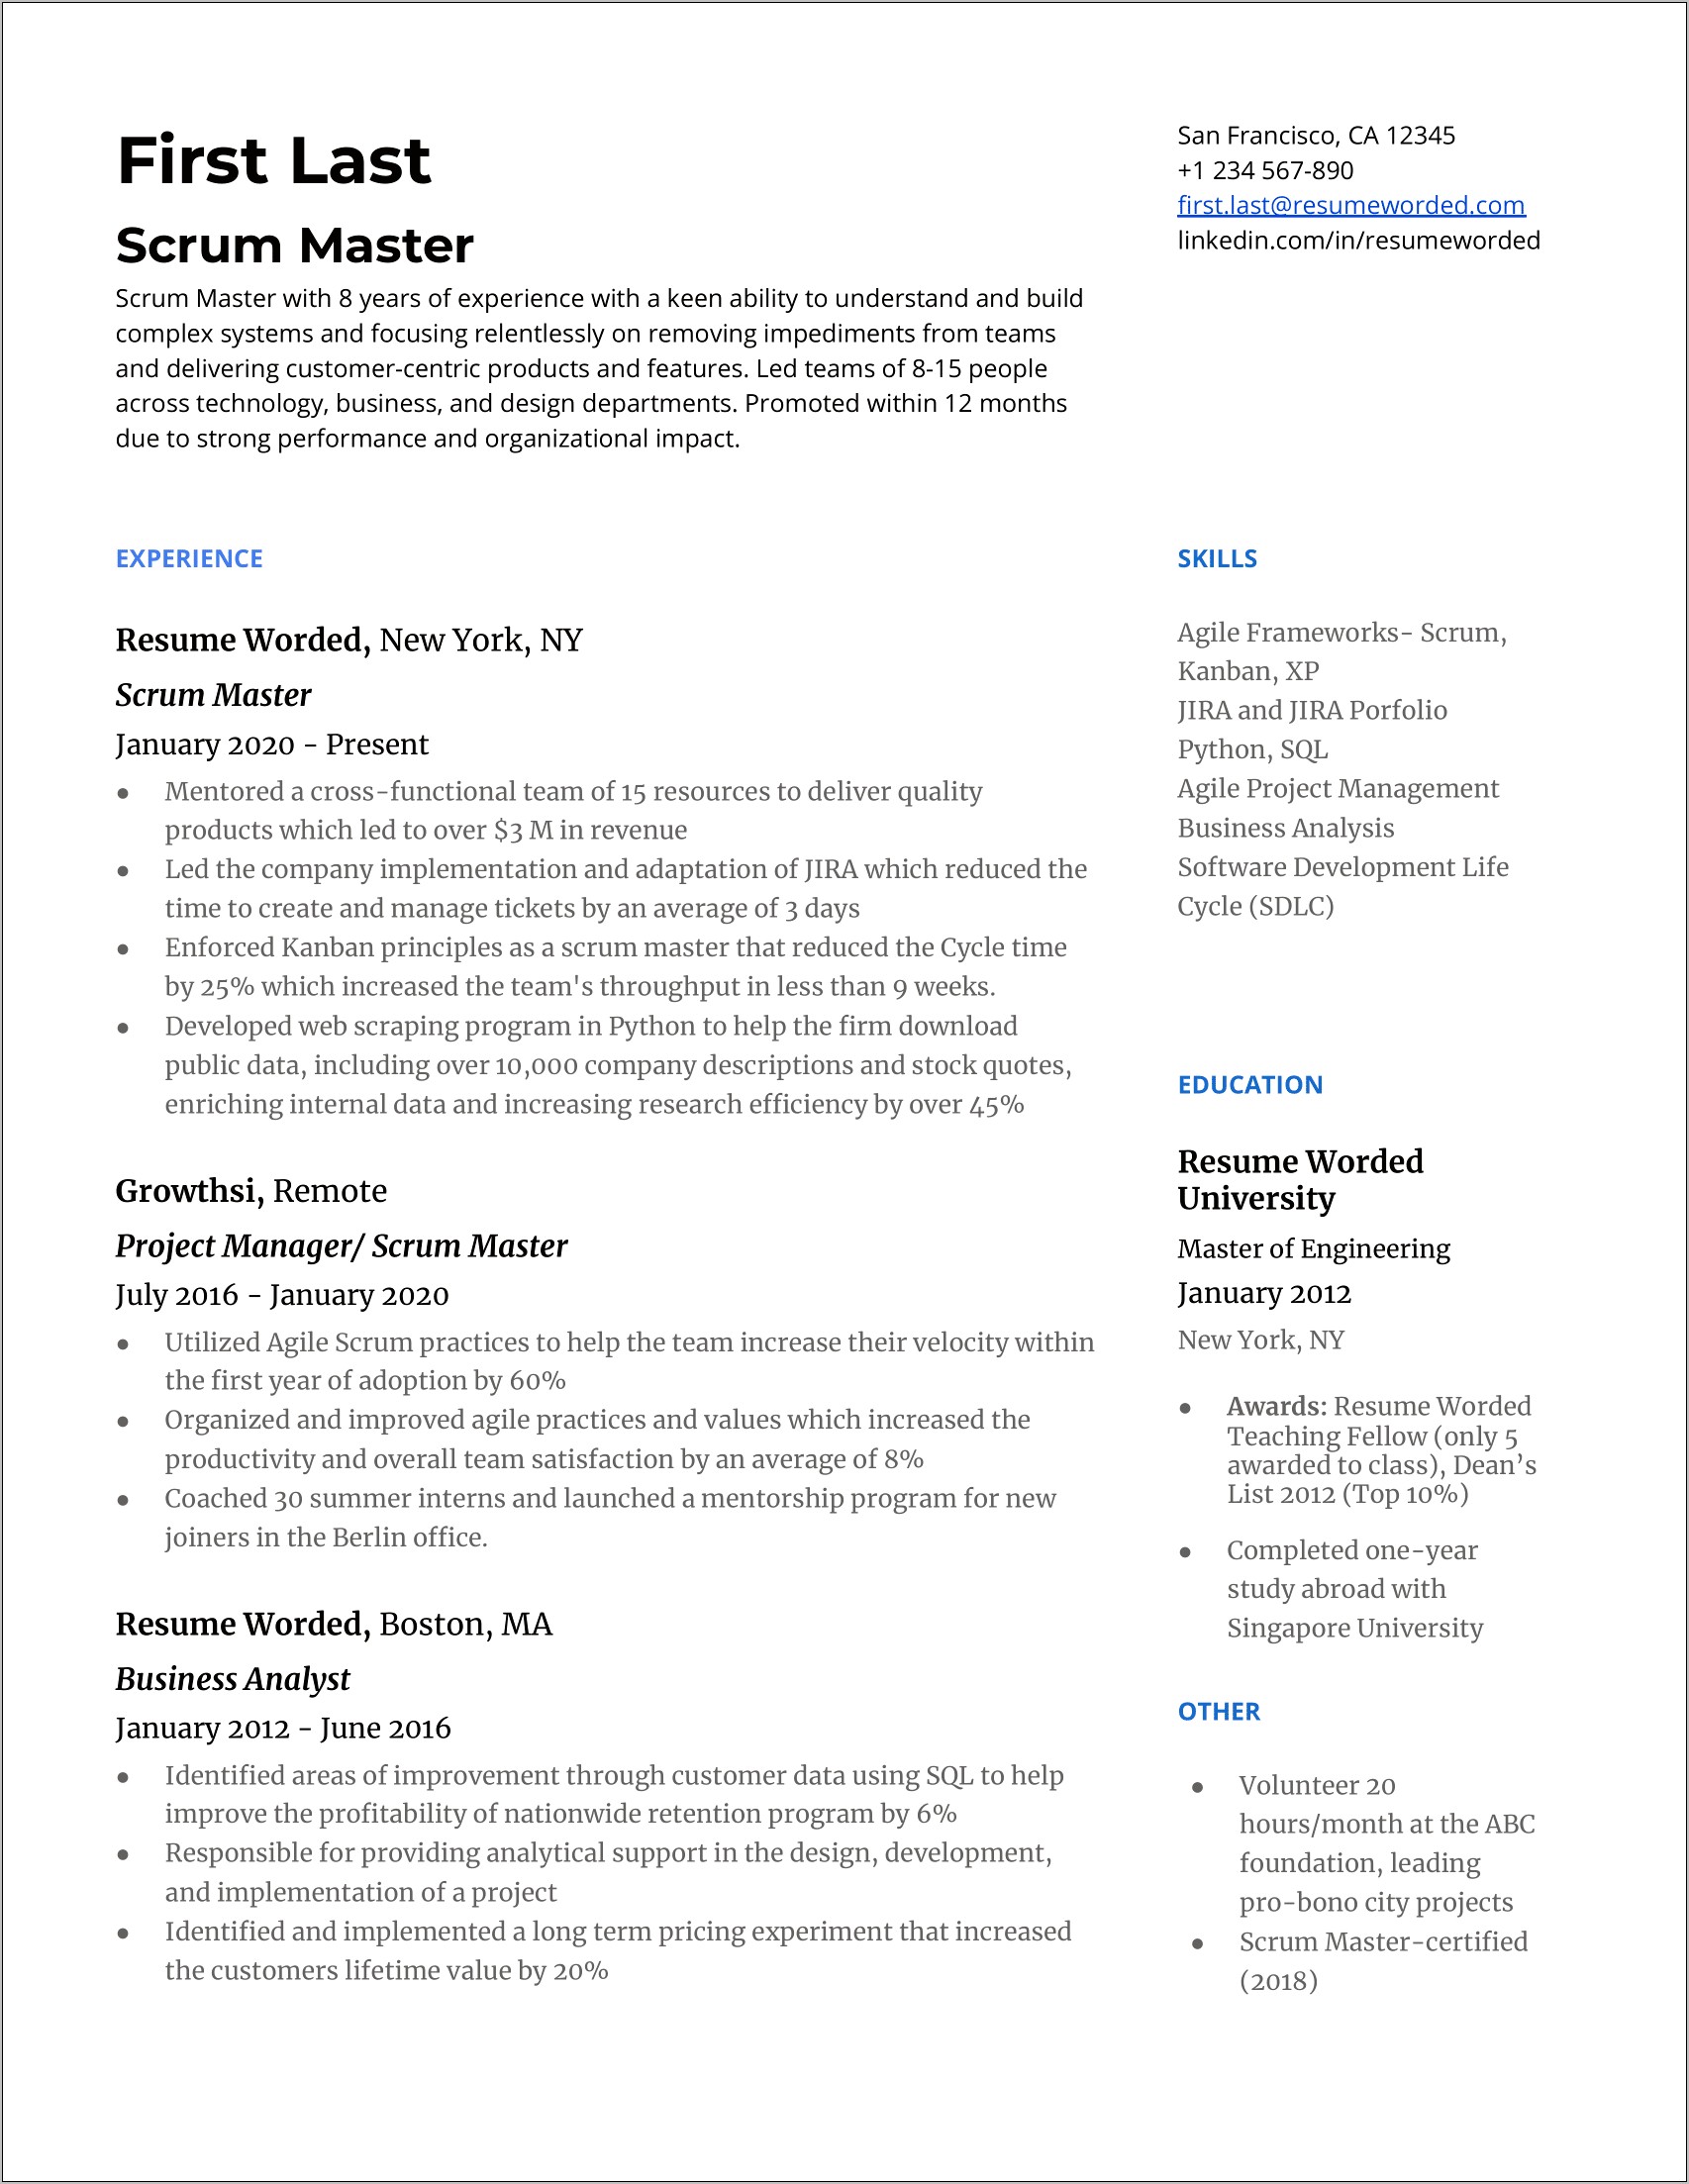 Scrum Master Resume With Specific Conflict Examples